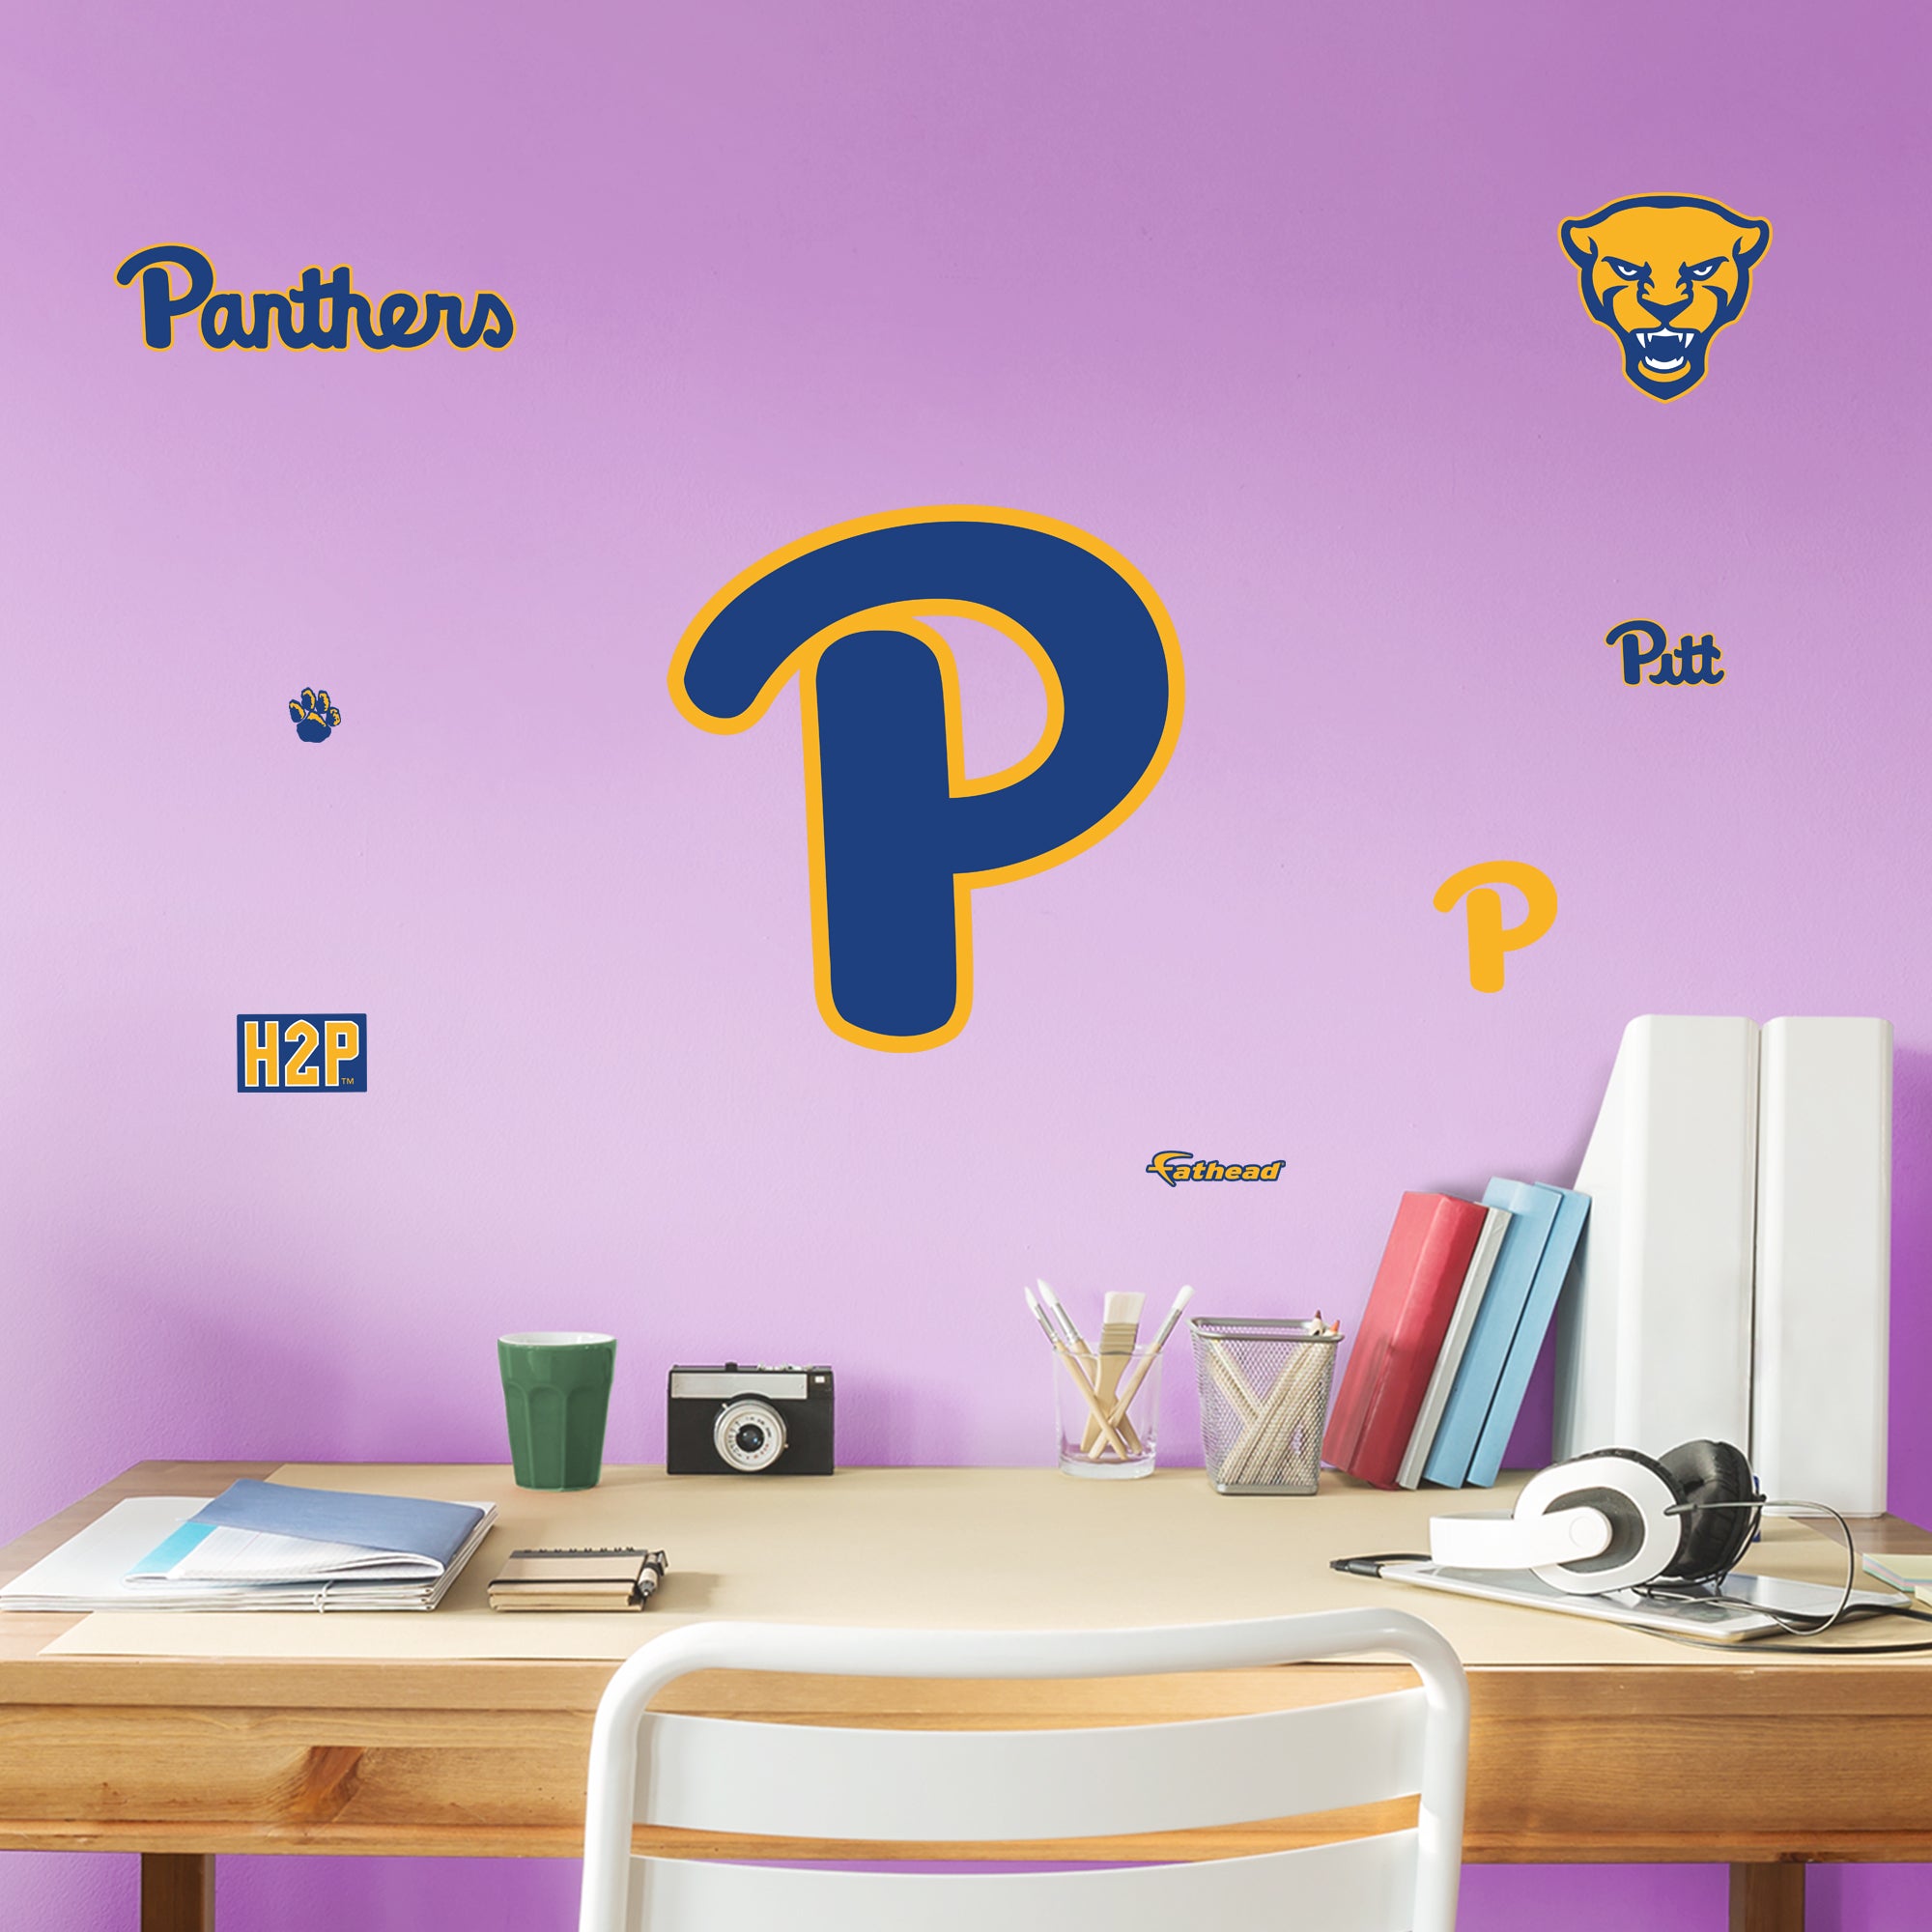 Pittsburgh Panthers: Secondary Logo - Officially Licensed Removable Wall Decal Giant Logo by Fathead | Vinyl